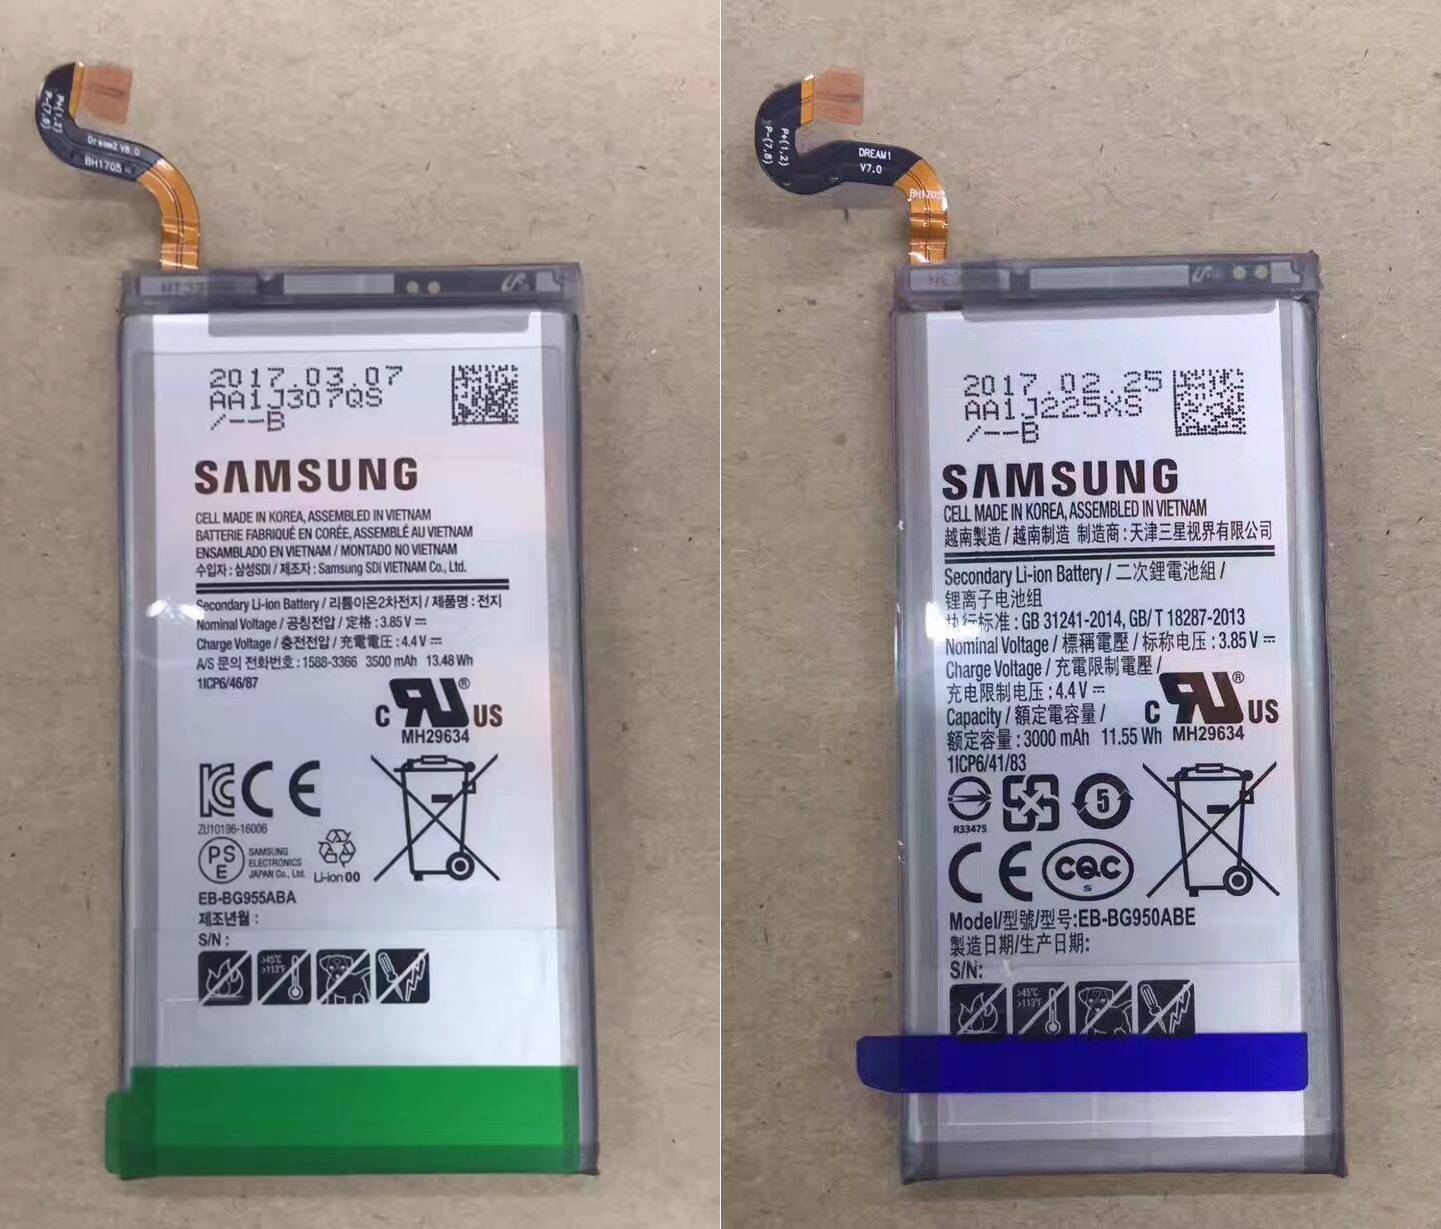 Samsung Galaxy S8 battery images